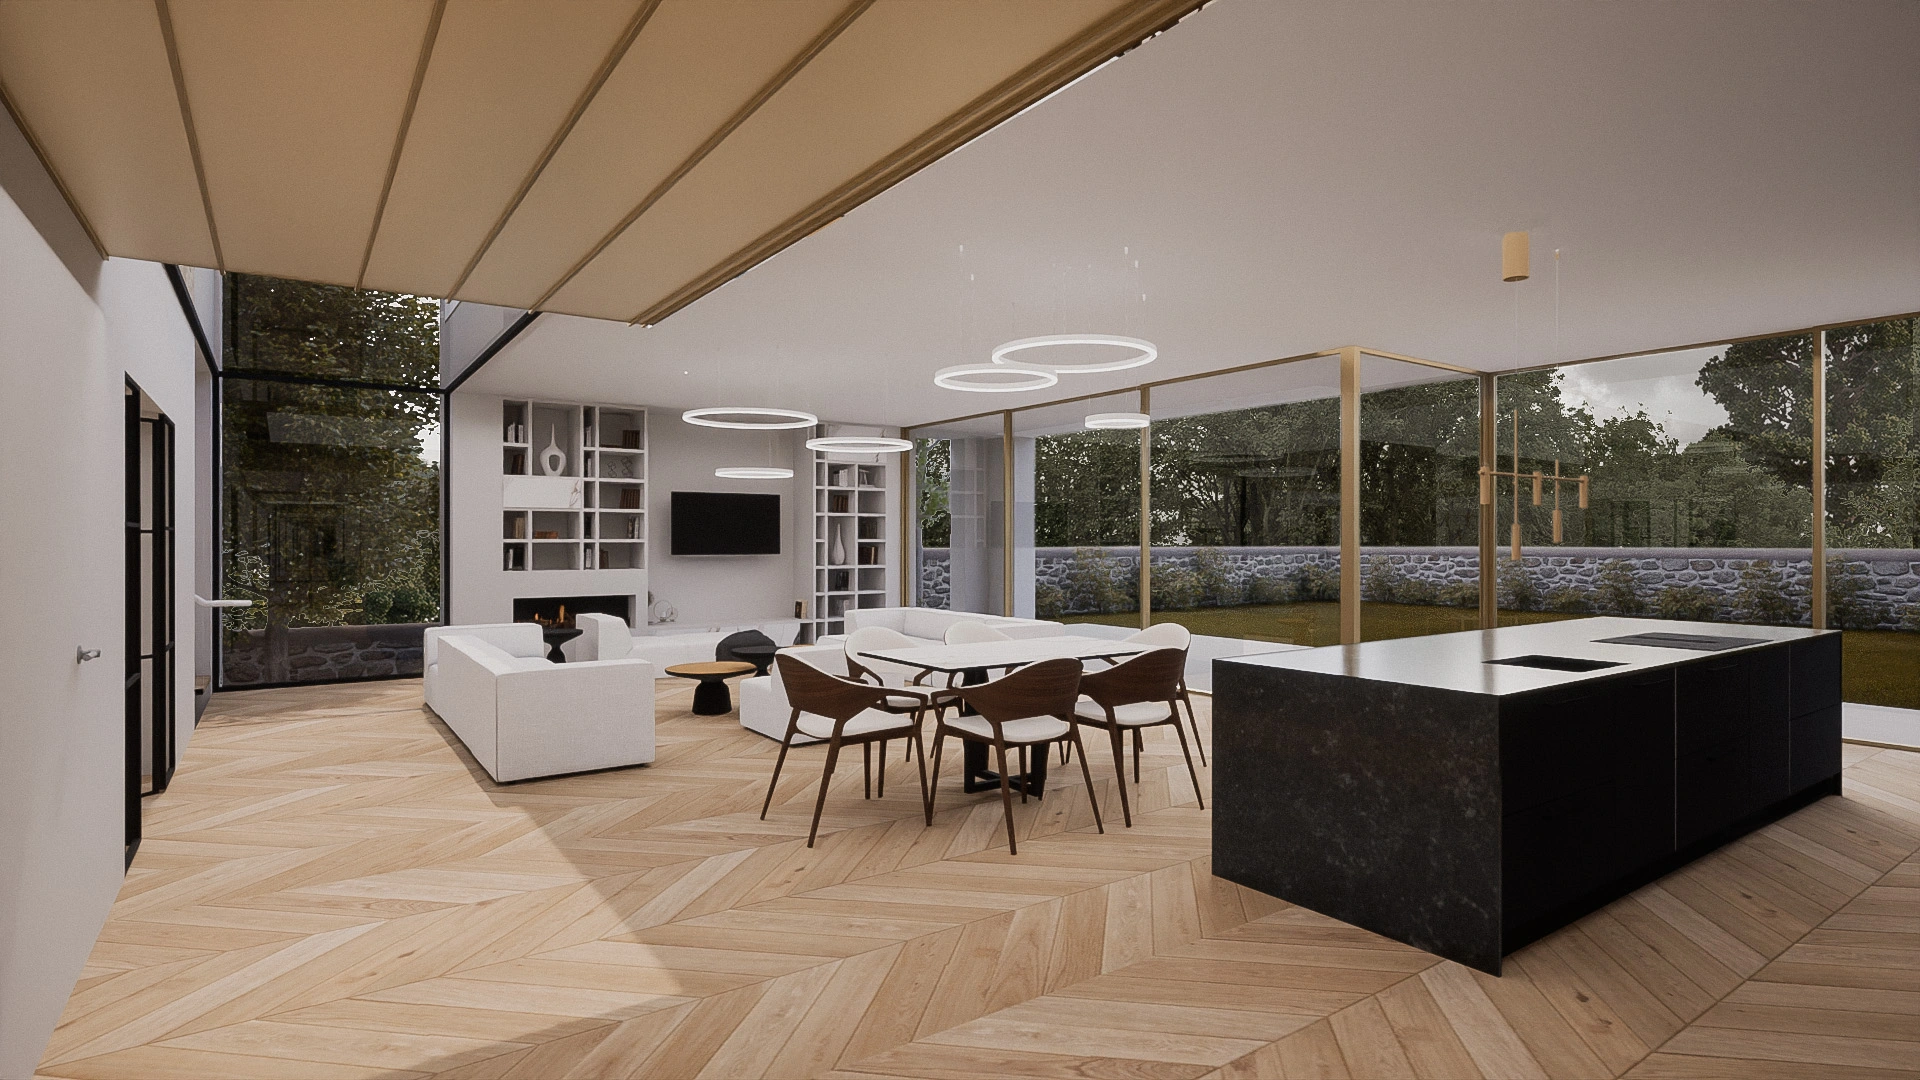 A new bespoke home design interior open-plan-living and dining space with hardwood floors, white walls, modern lighting feature and floor-to-ceiling windows looking towards the back garden.